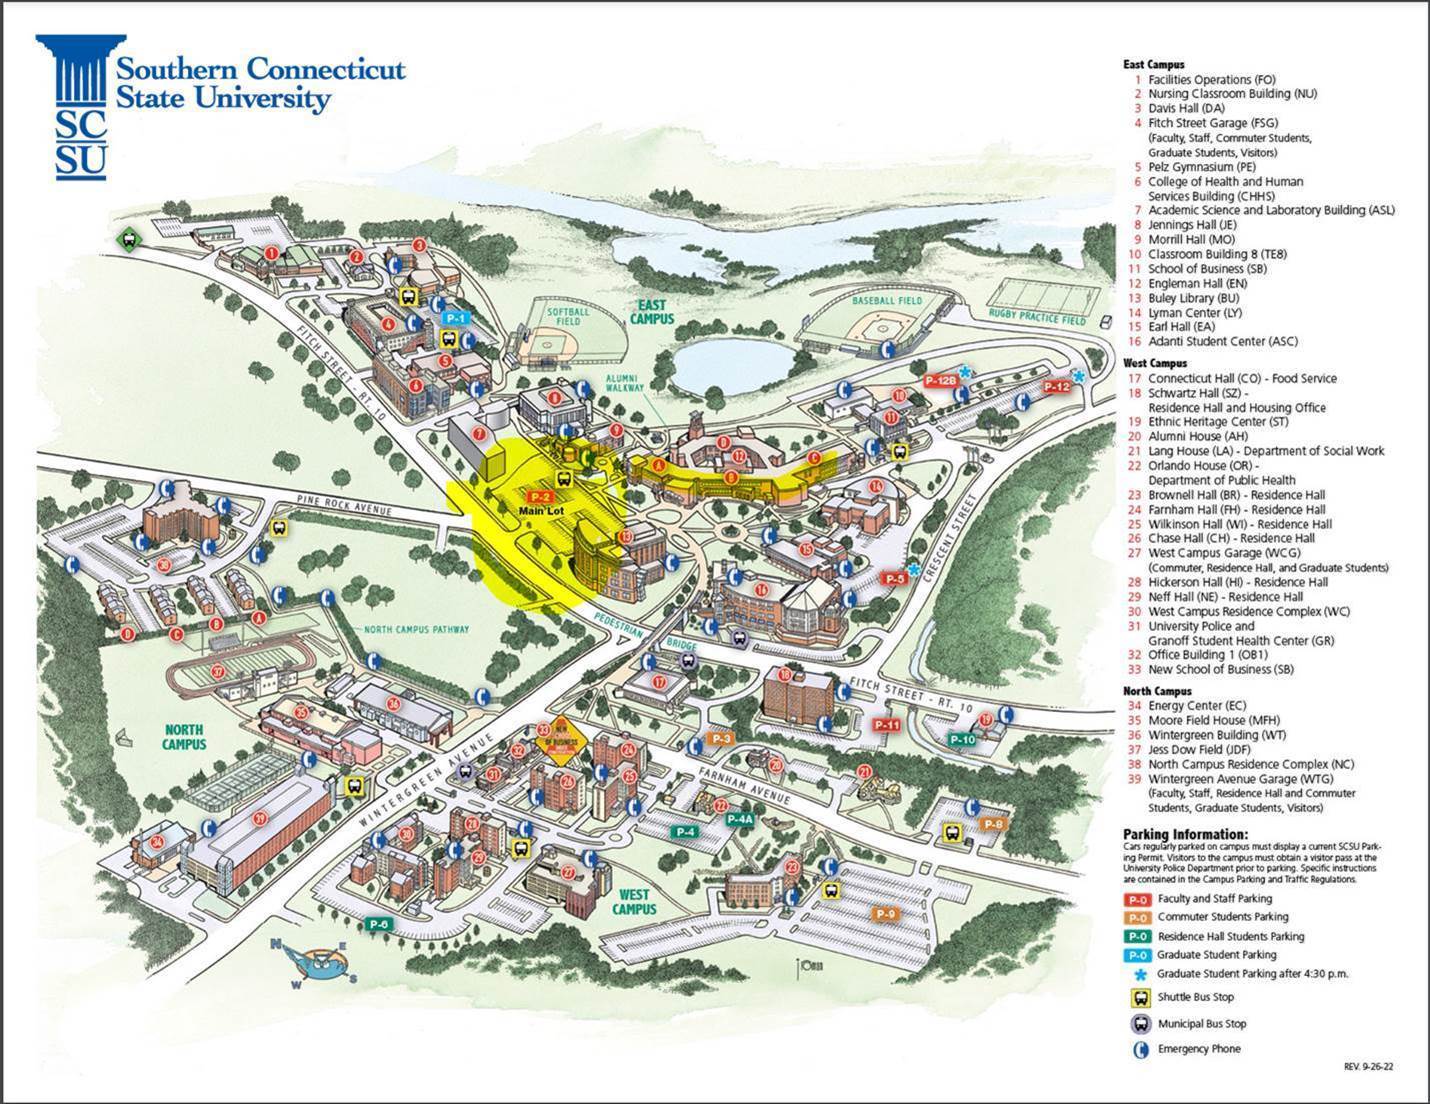 Campus Map with highlights